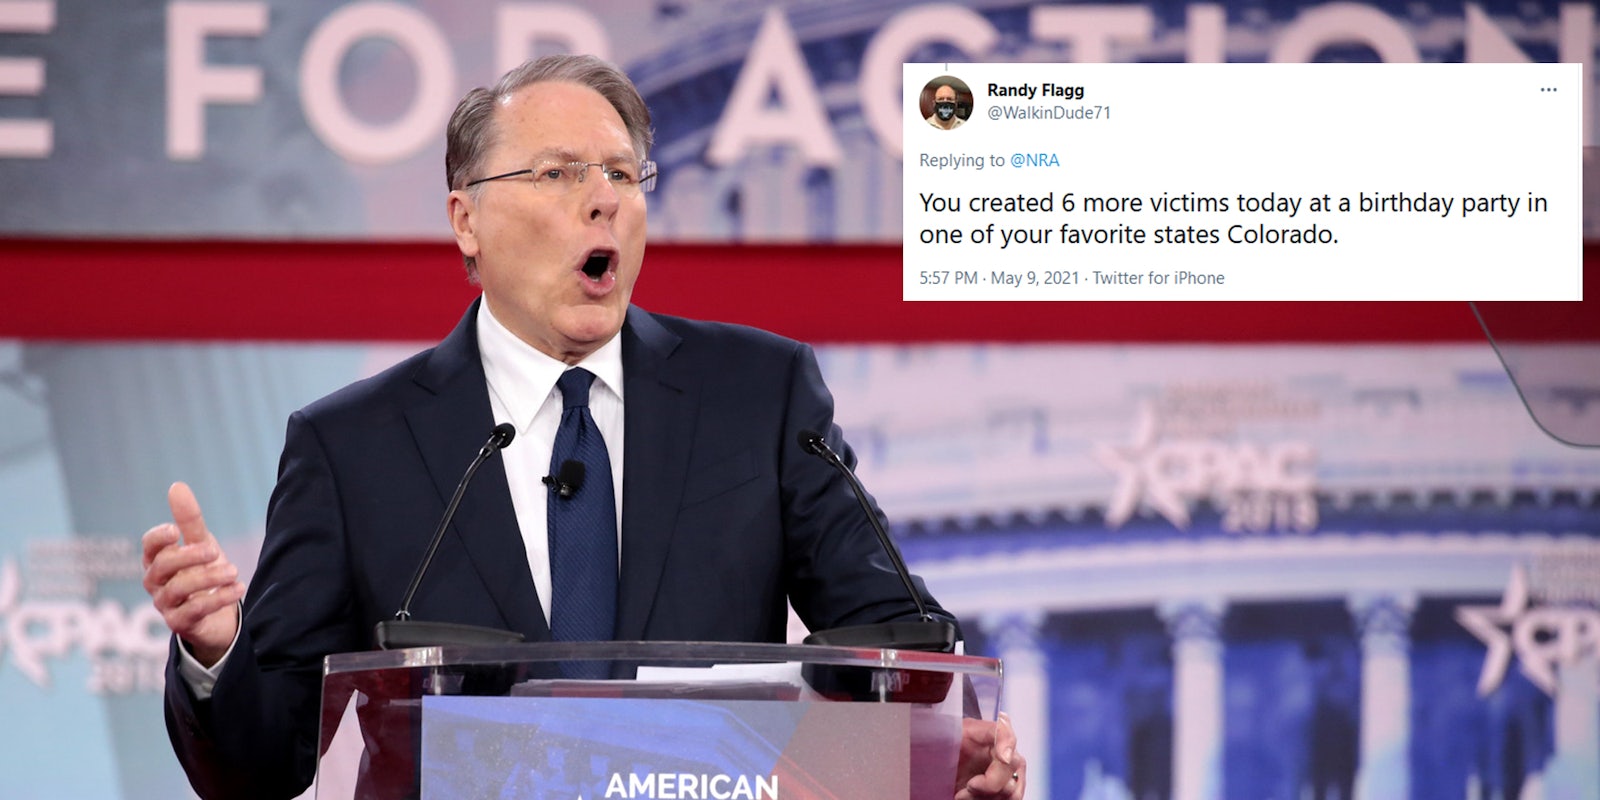 NRA CEO Wayne LaPierre next to a tweet of someone criticizing their Mother's Day tweet.